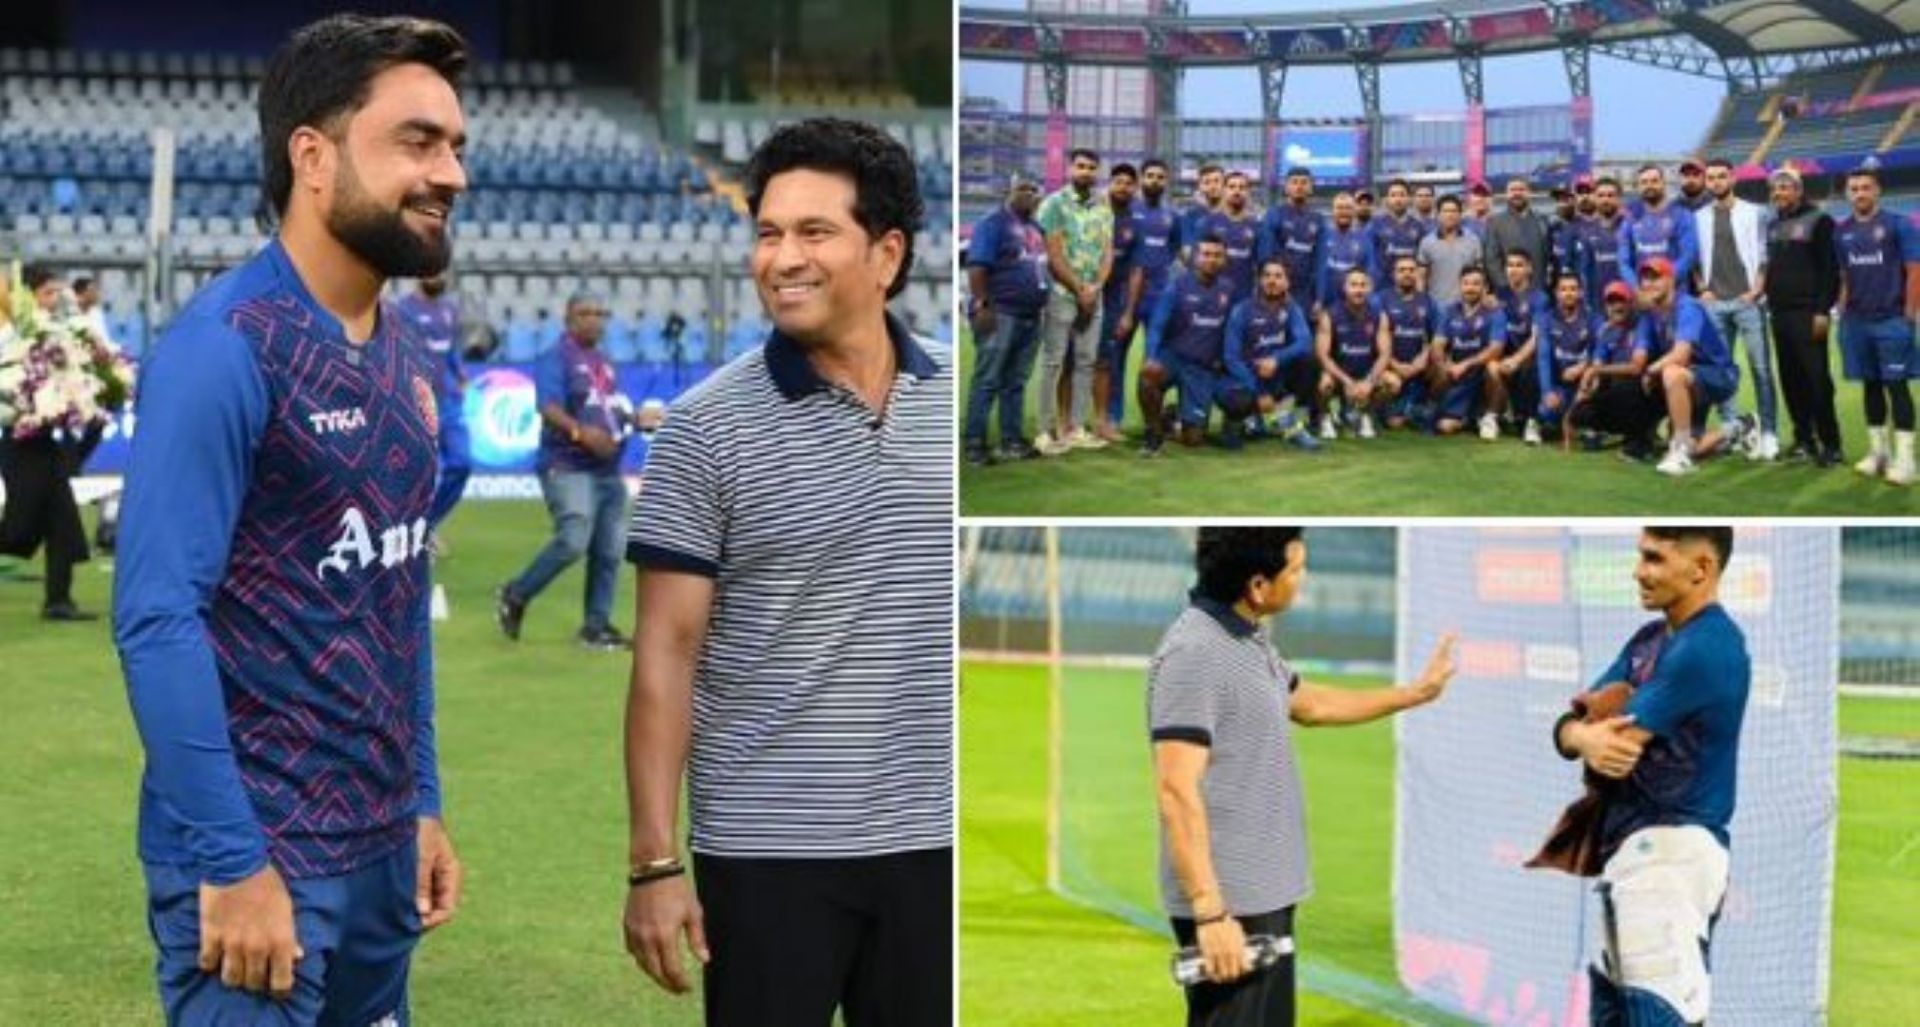 Tendulkar was seen giving a pep talk to the Afghan players at the Wankhede Stadium